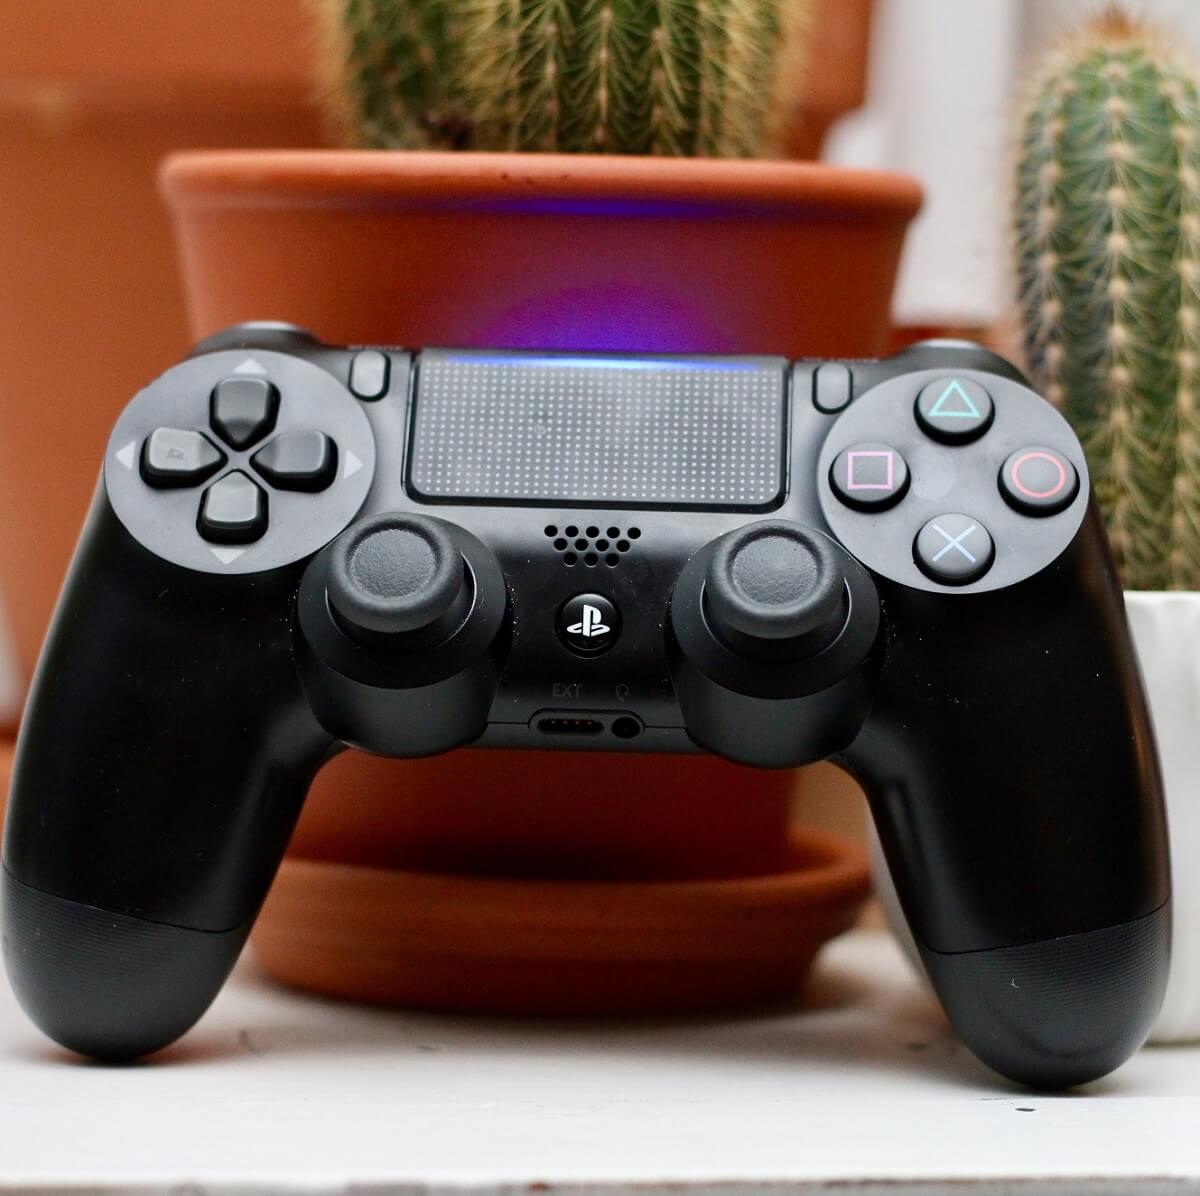 Playstation remote play